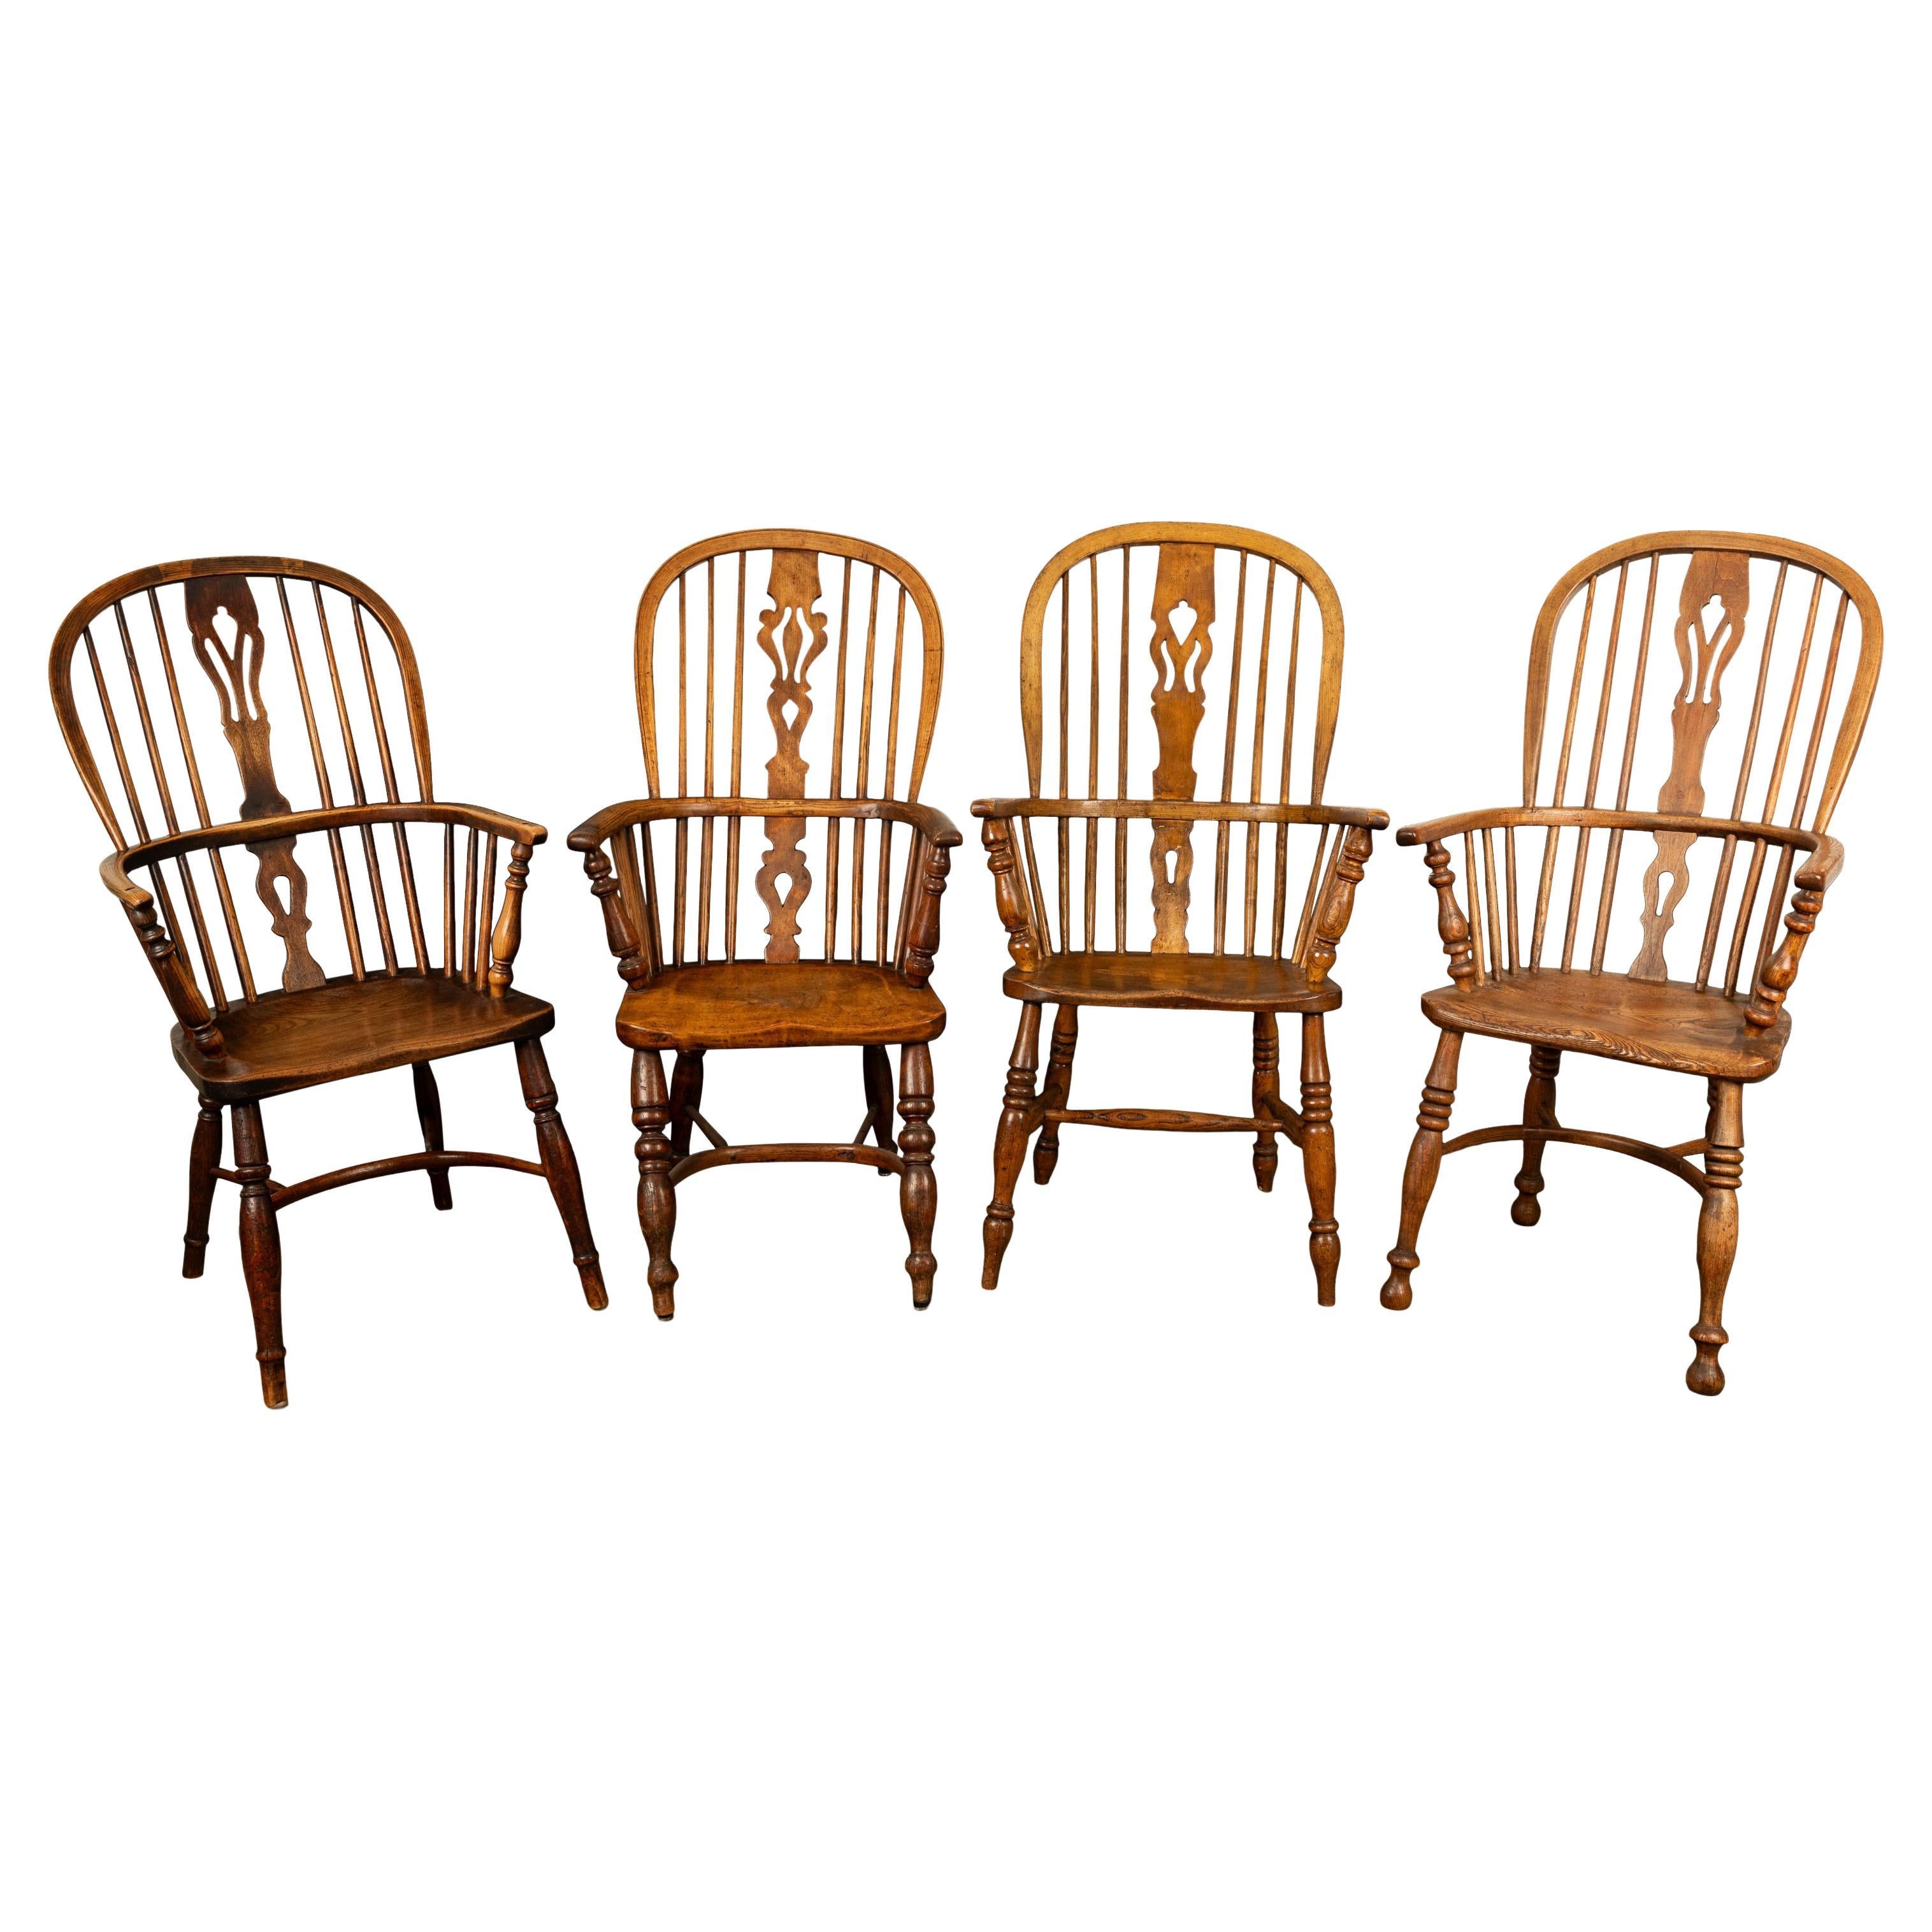 Set 4 Antique 19thC High-backed English Ash Elm Country Windsor Arm Chairs 1840 